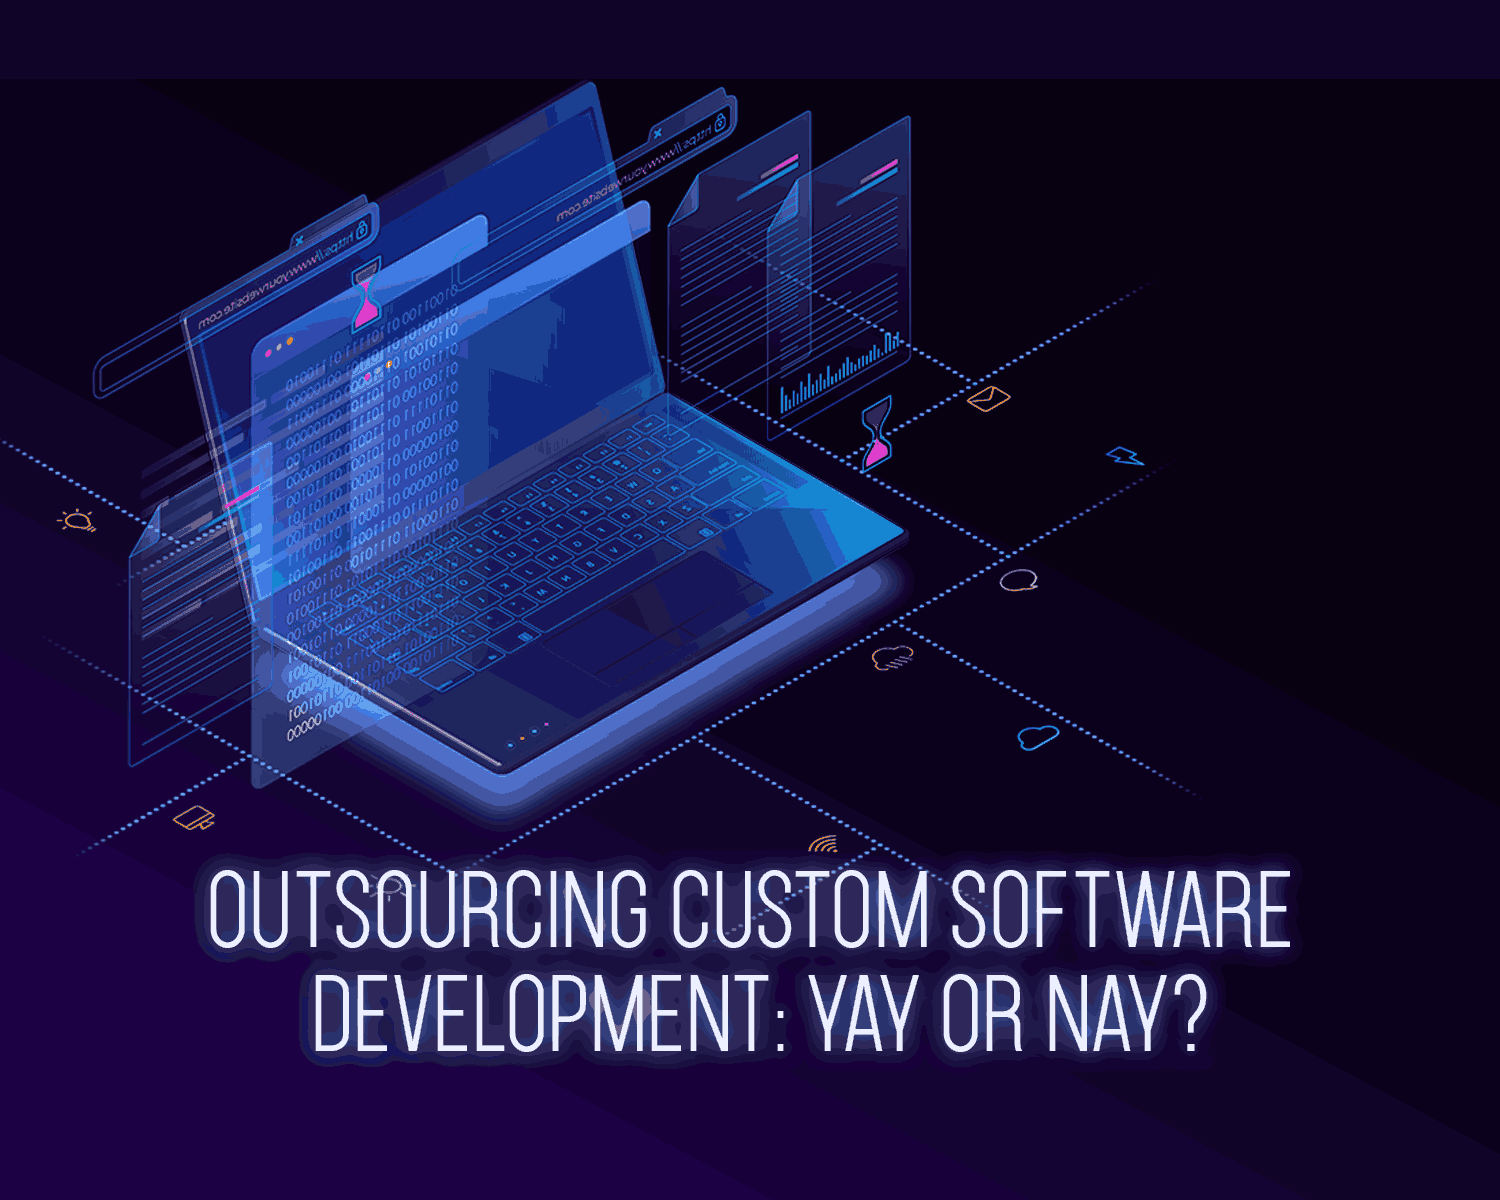 Outsourcing Custom Software Development: Yay or Nay?